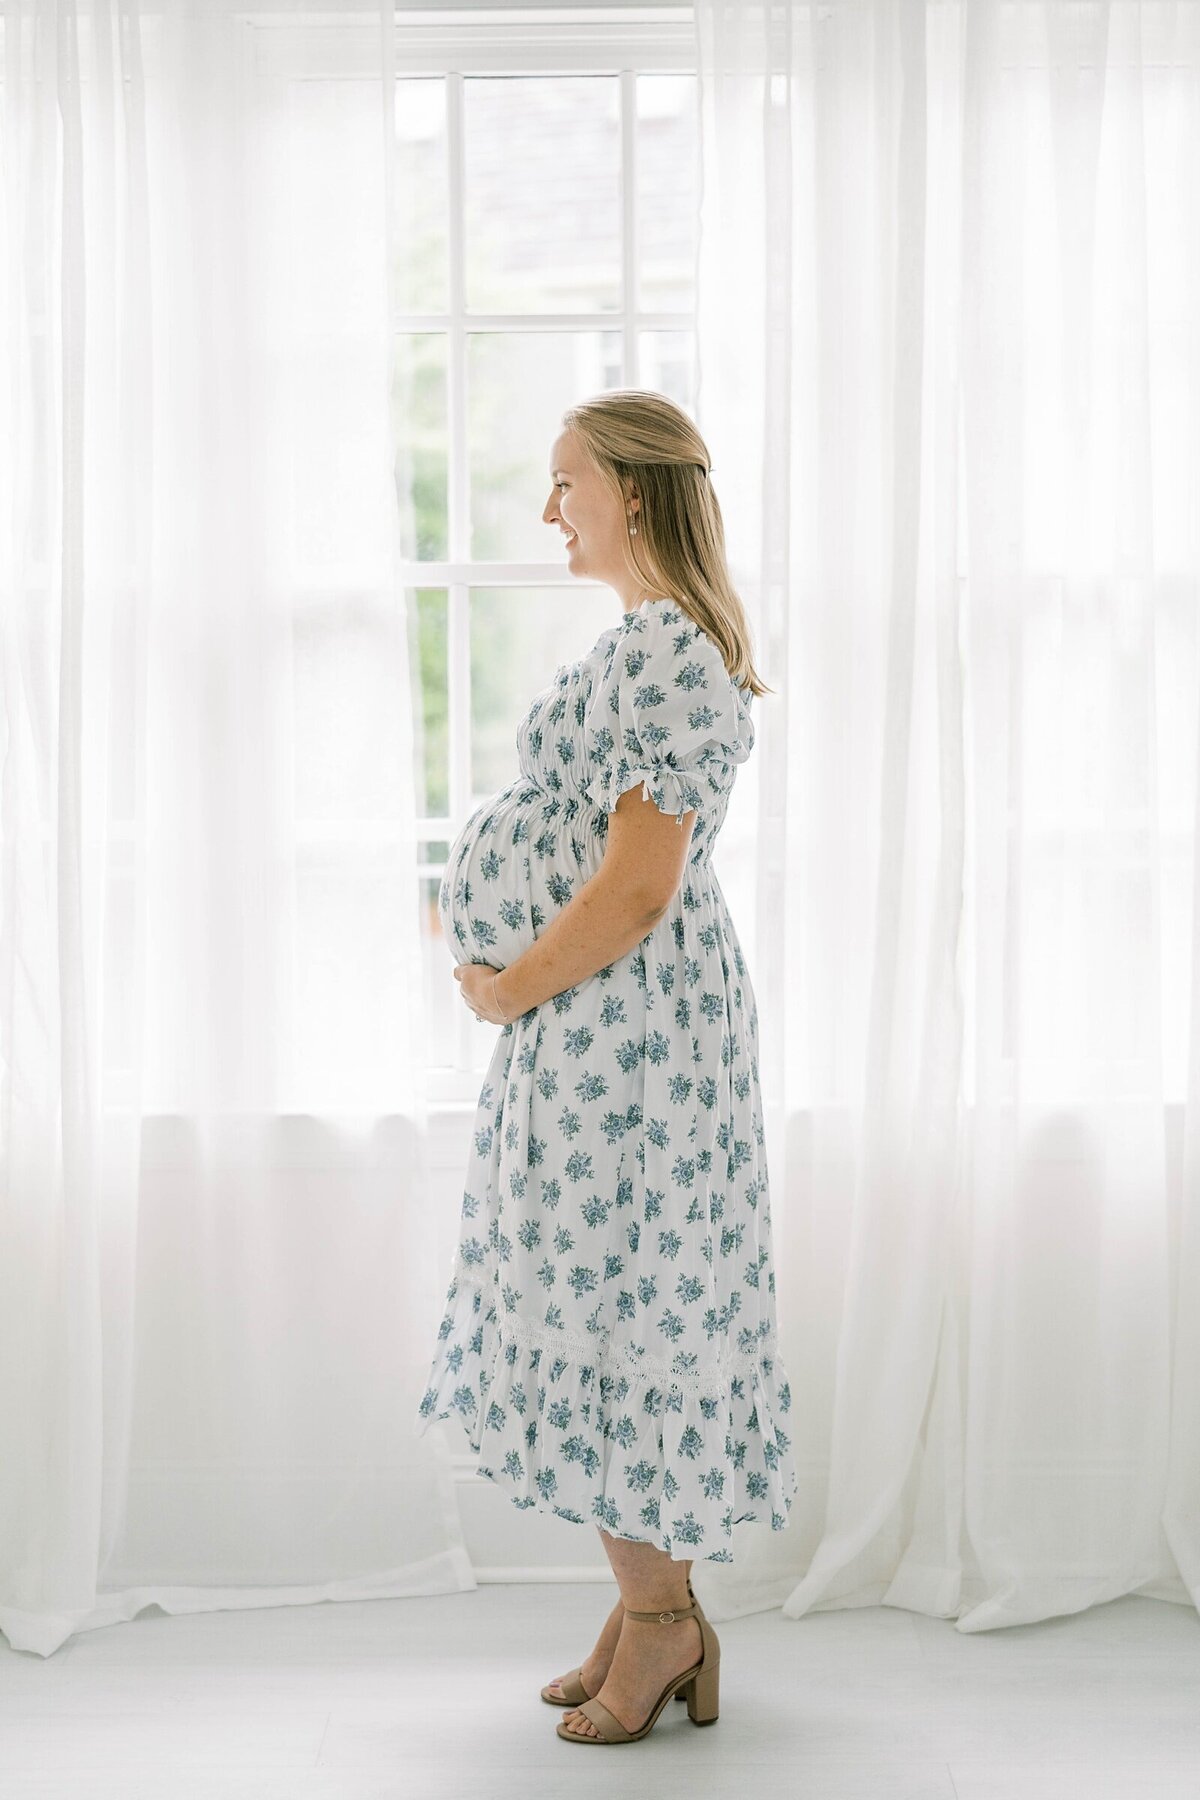 Roswell Maternity Photographer_0067